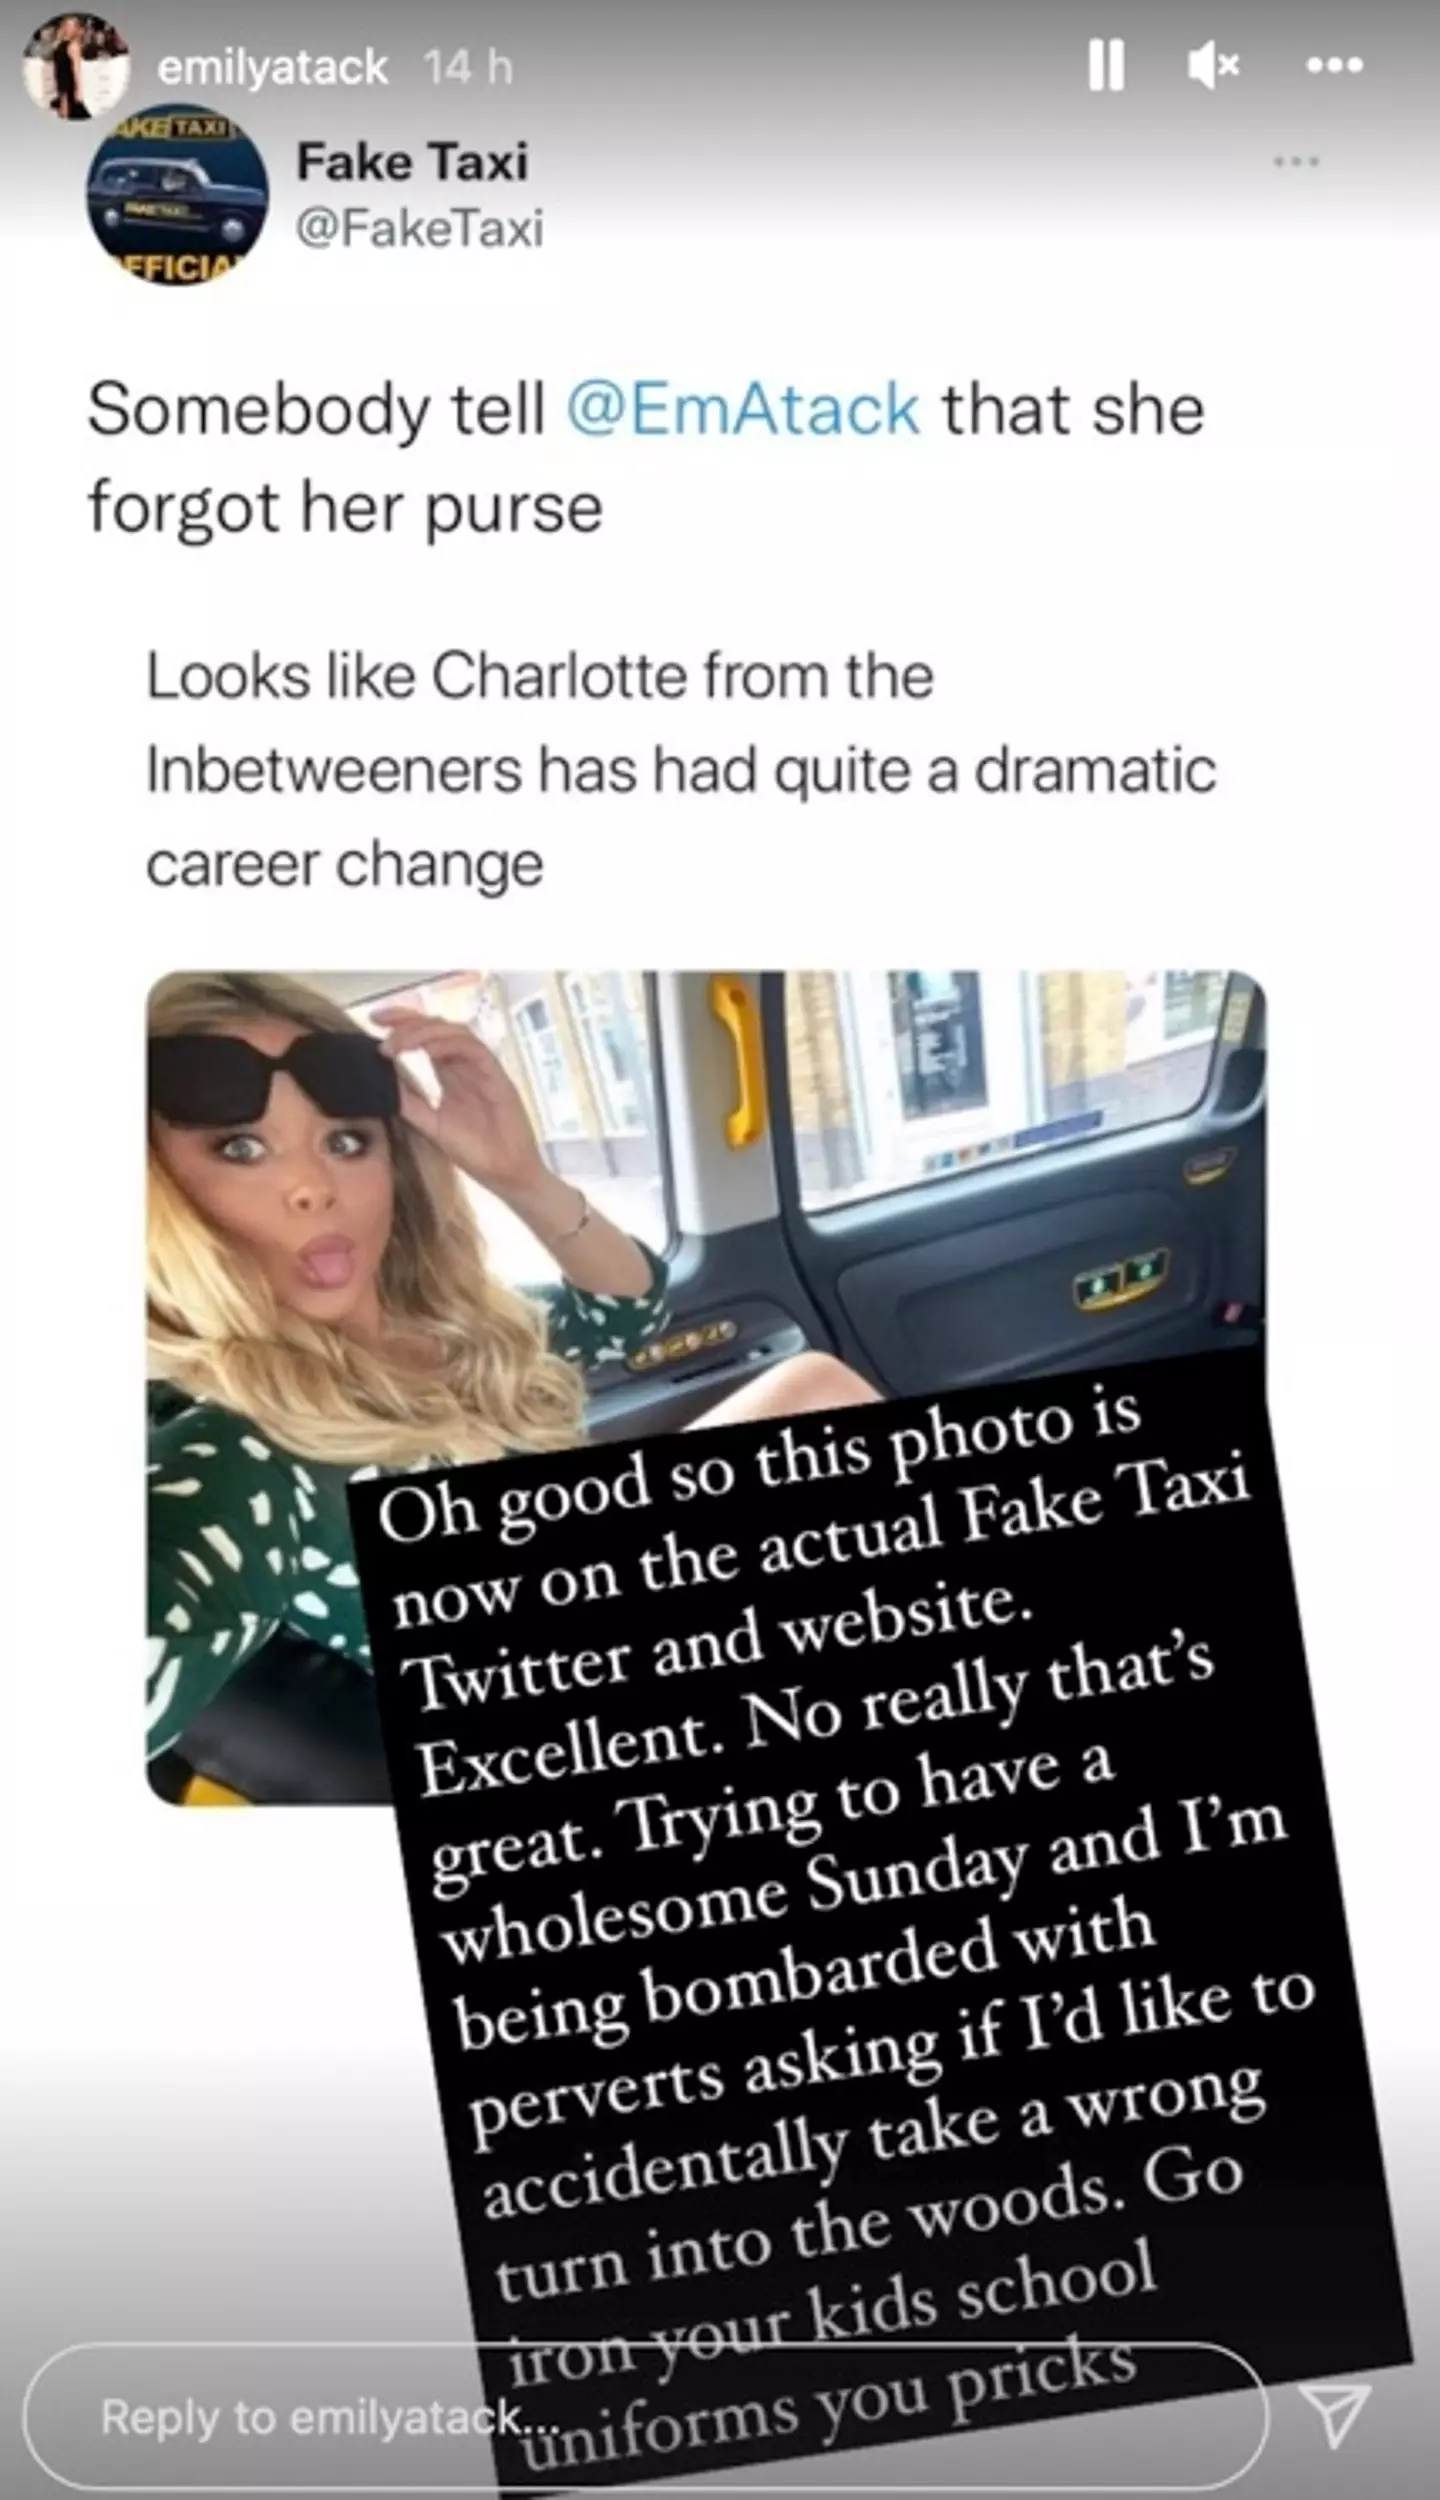 Emily Atack says she has received a barrage of abuse following the Fake Taxi Post.